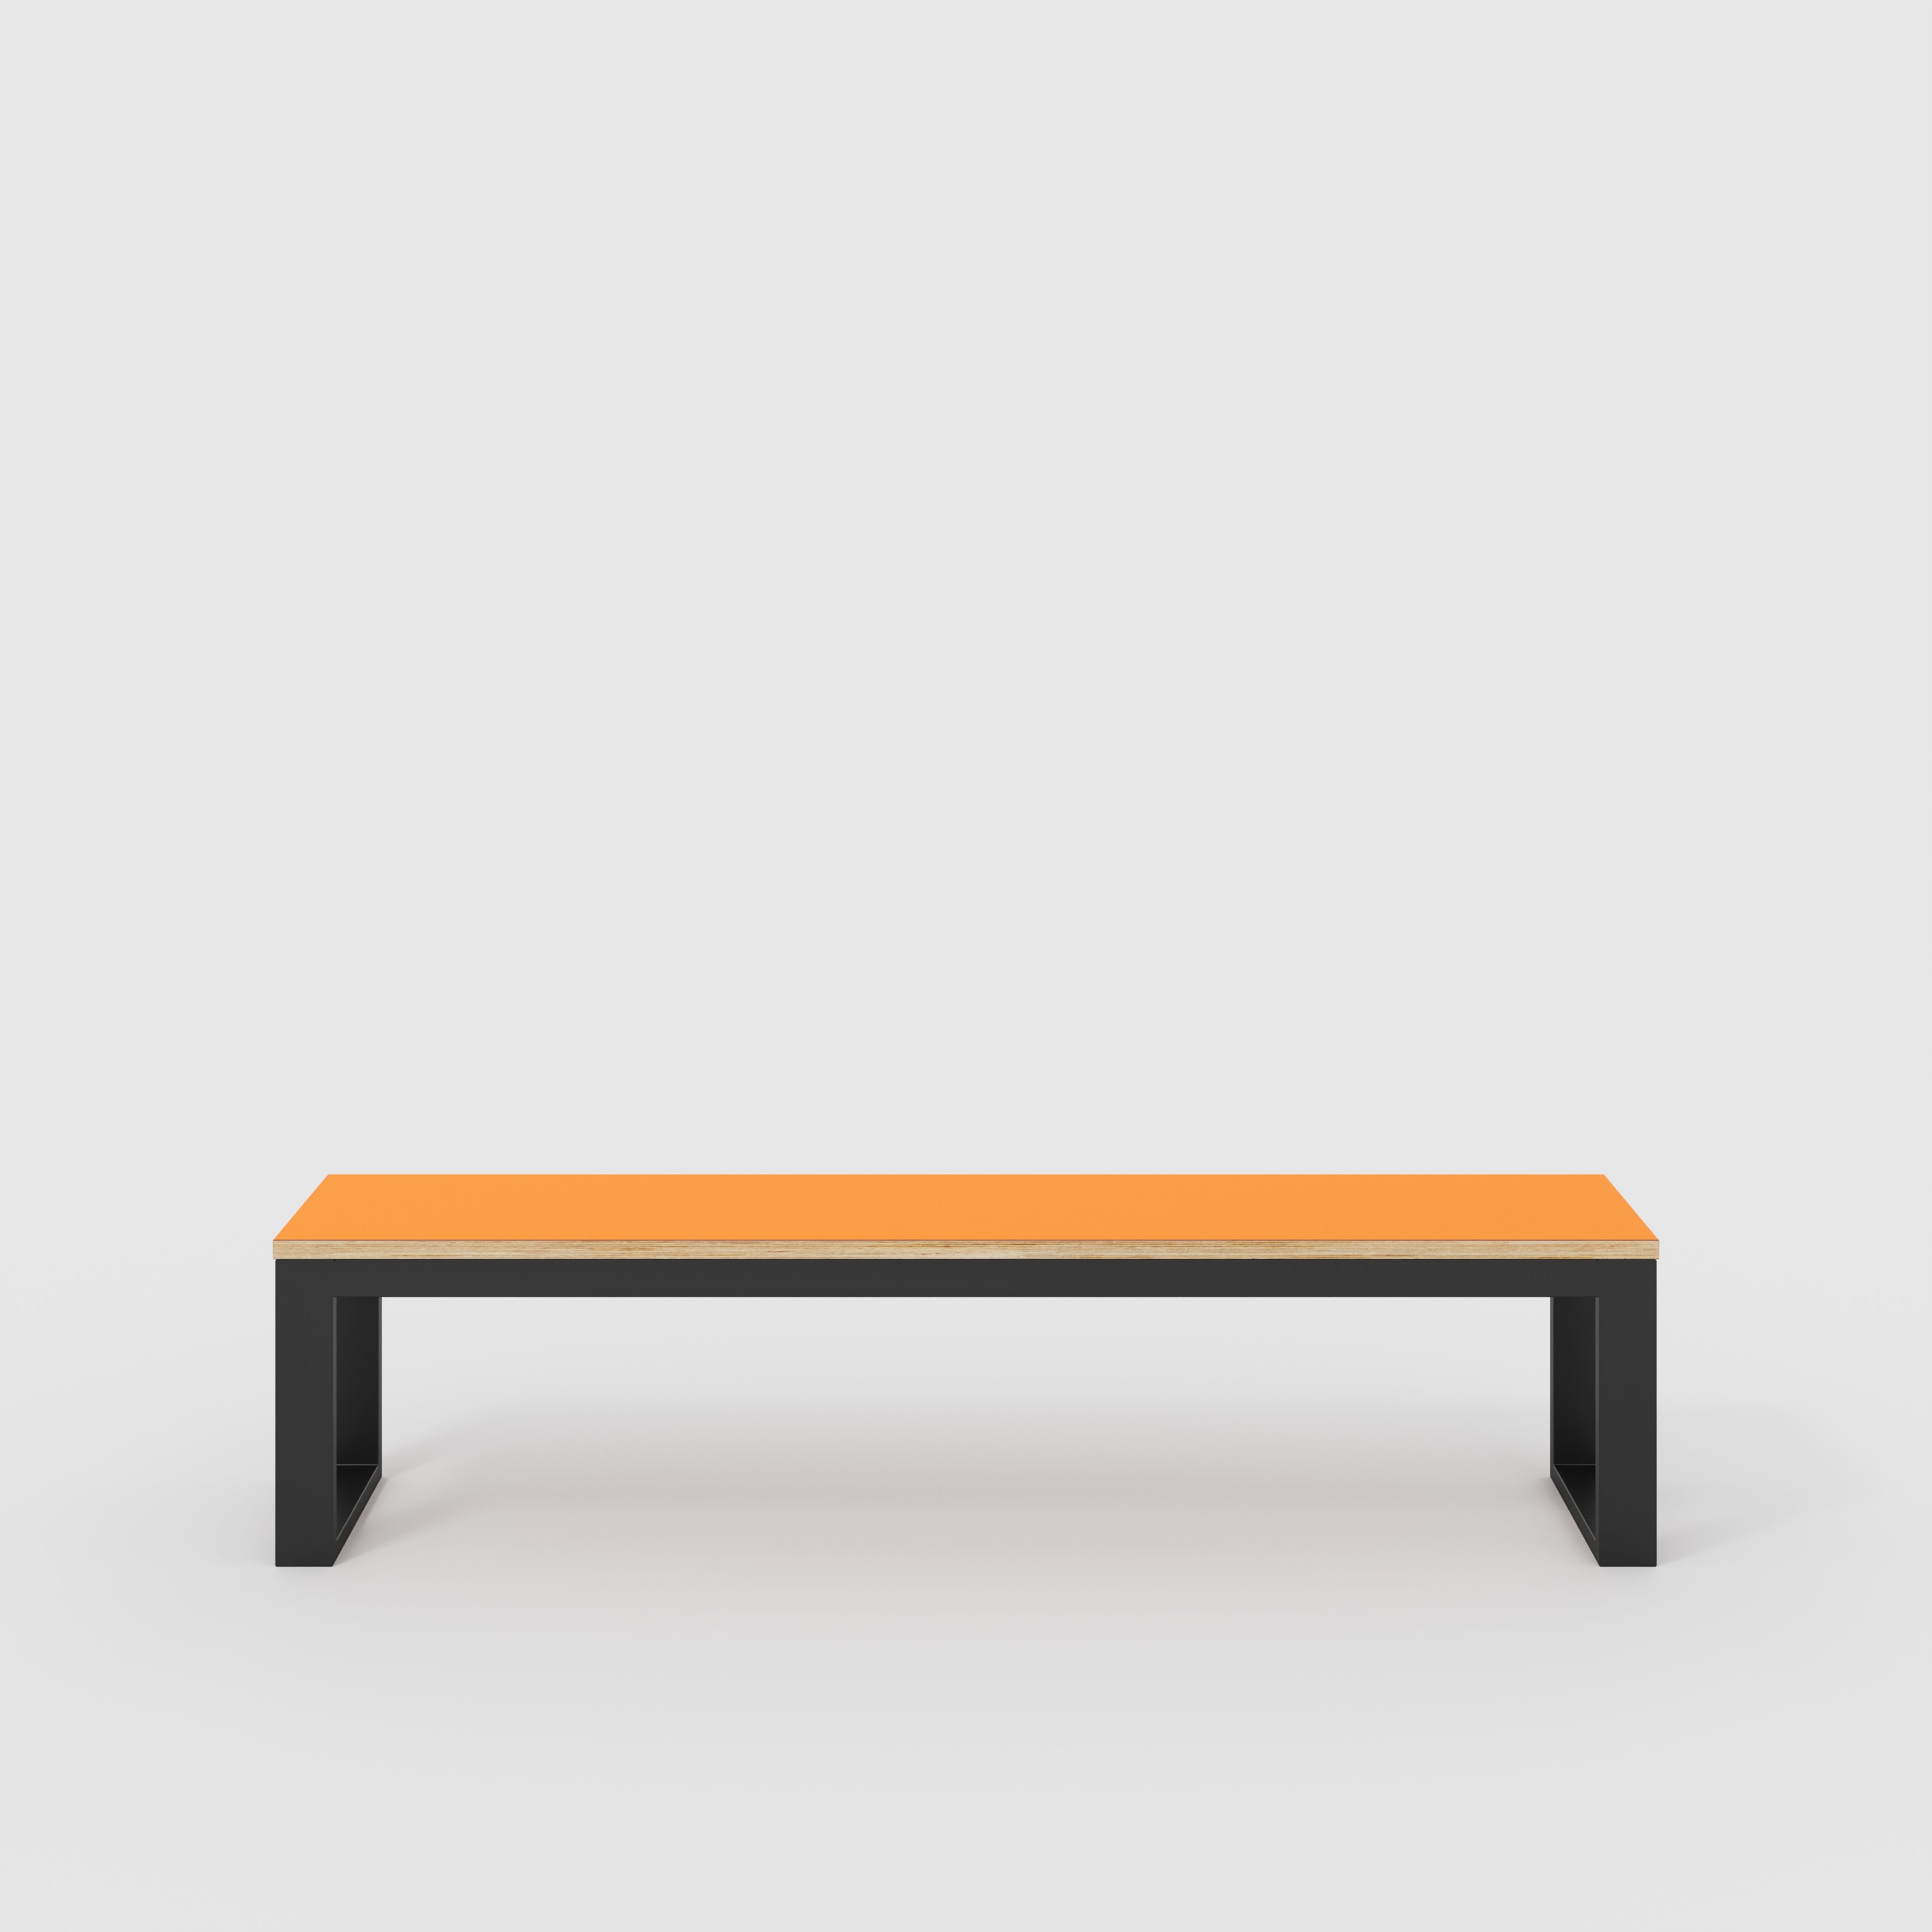 Bench Seat with Black Industrial Frame - Formica Levante Orange - 1800(w) x 325(d)